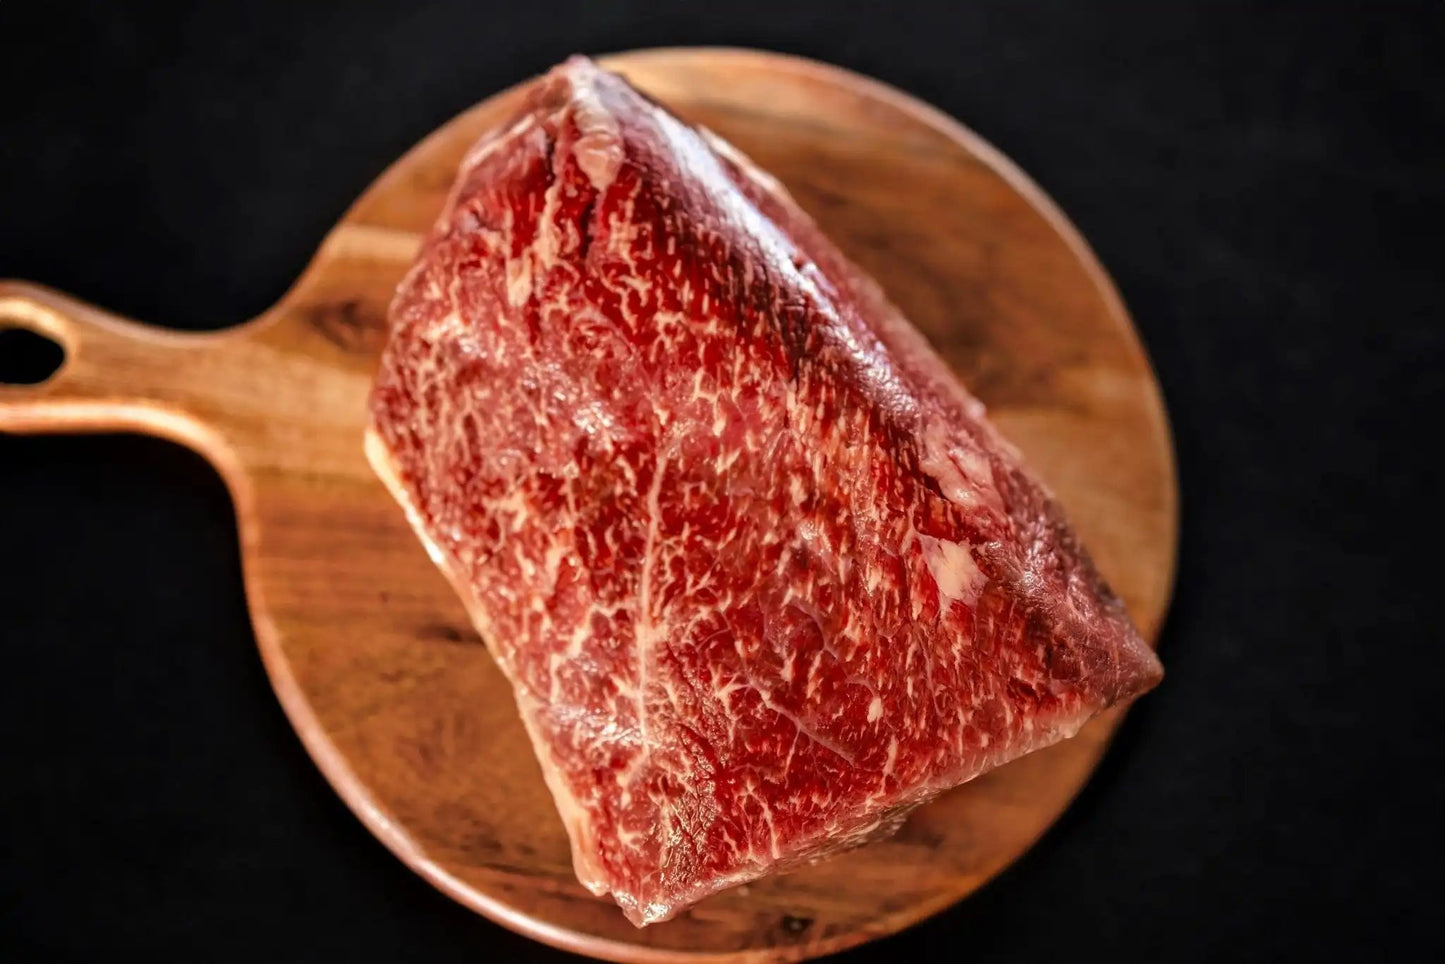 100% All-Natural Grass-Fed Pasture-Raised Wagyu Rump Roast - The Hufeisen-Ranch (WYO Wagyu)